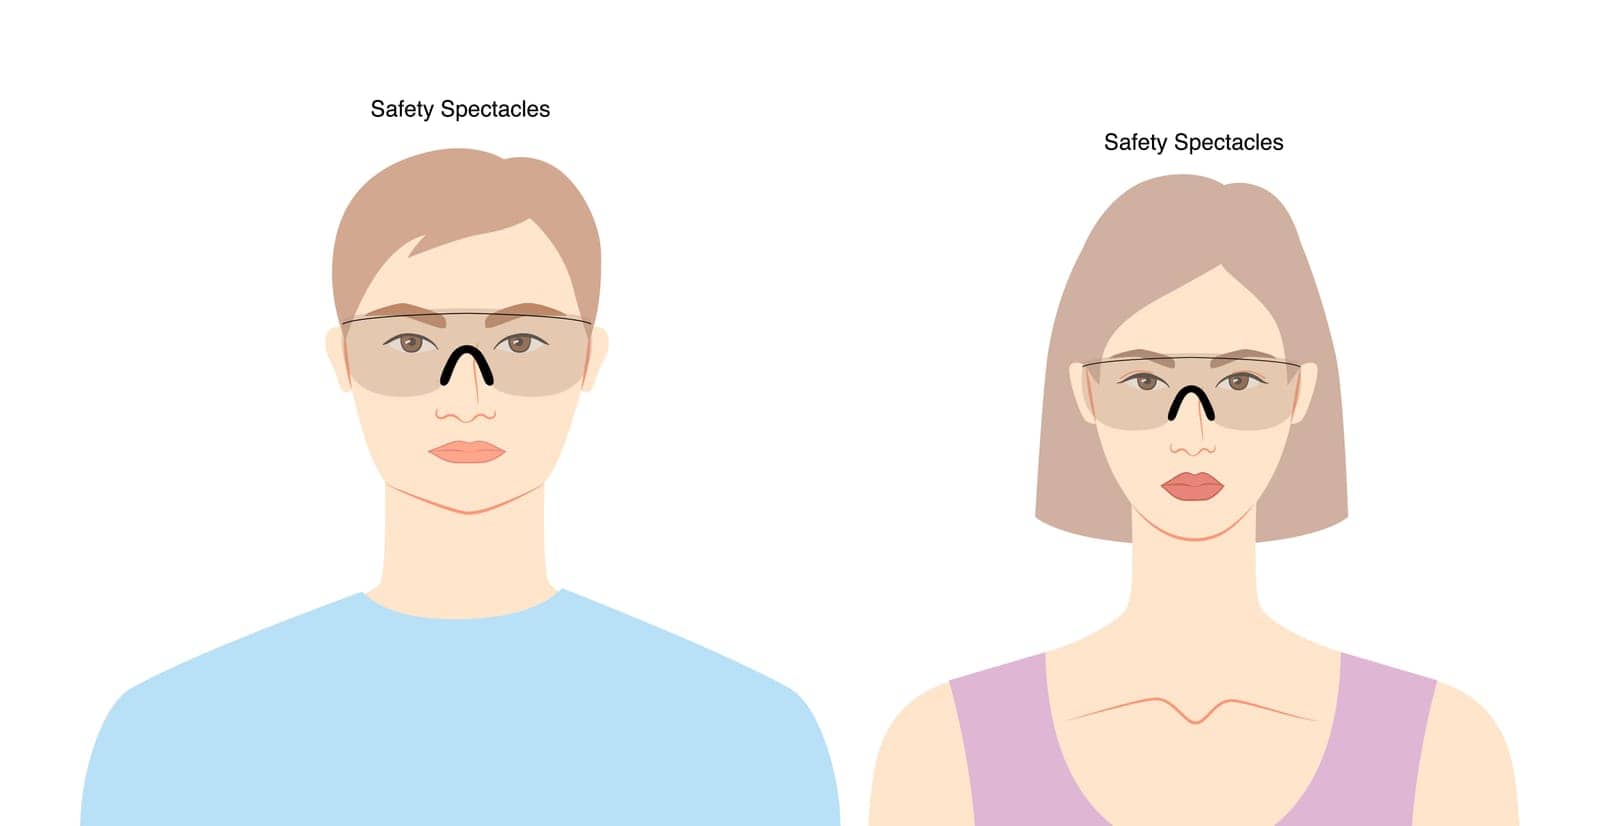 Safety Spectacles frame glasses on women and men flat character fashion accessory illustration. Sunglass unisex by Vectoressa